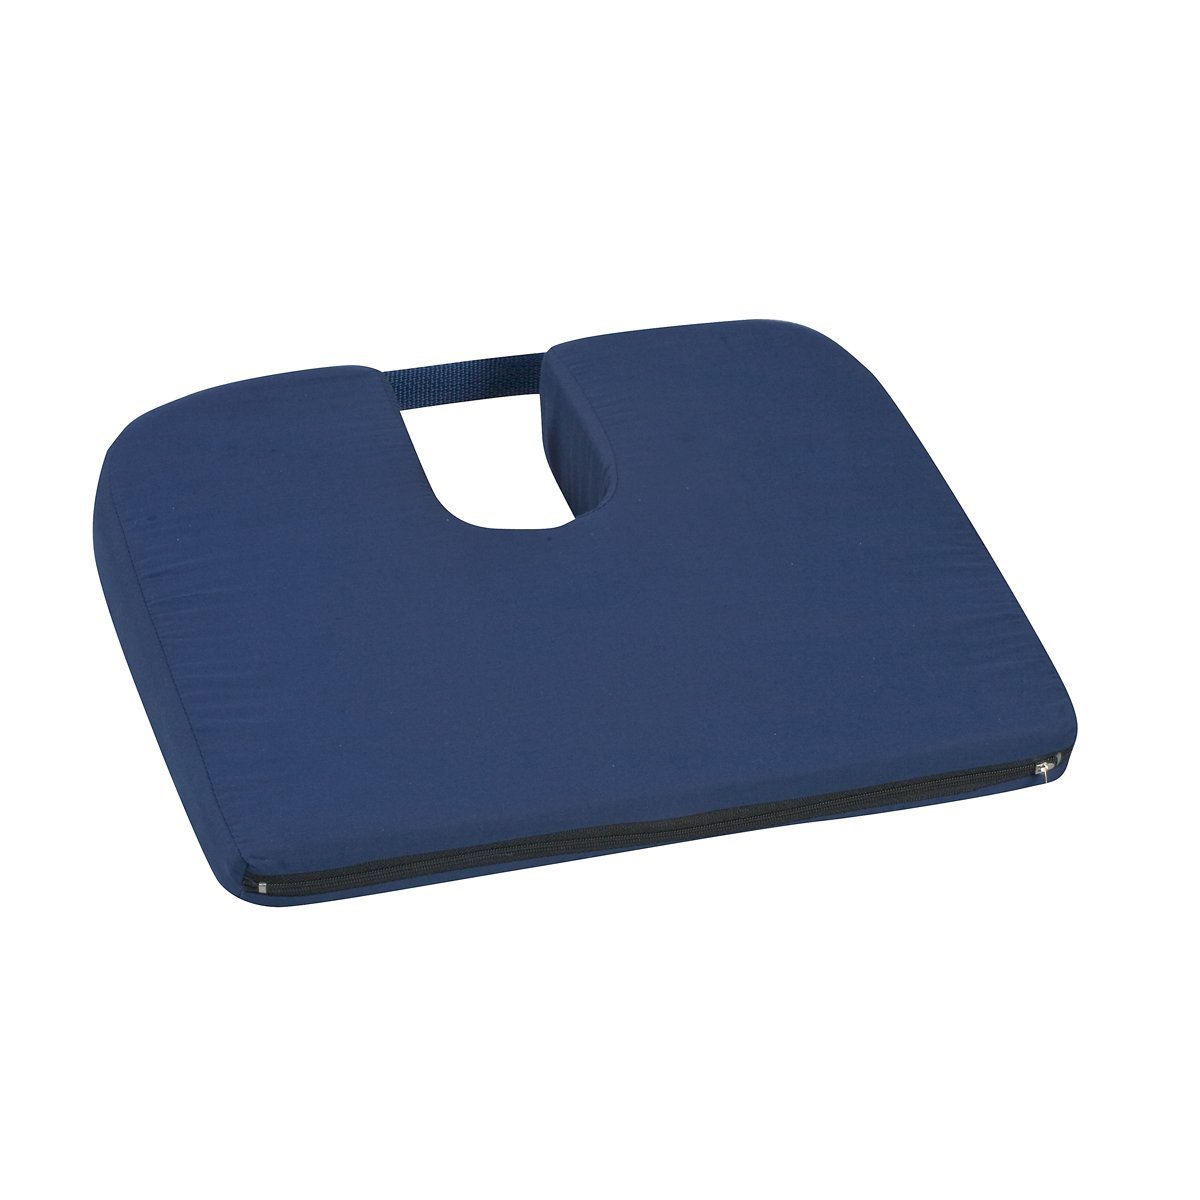 Duro-Med Sloping Coccyx Cushion